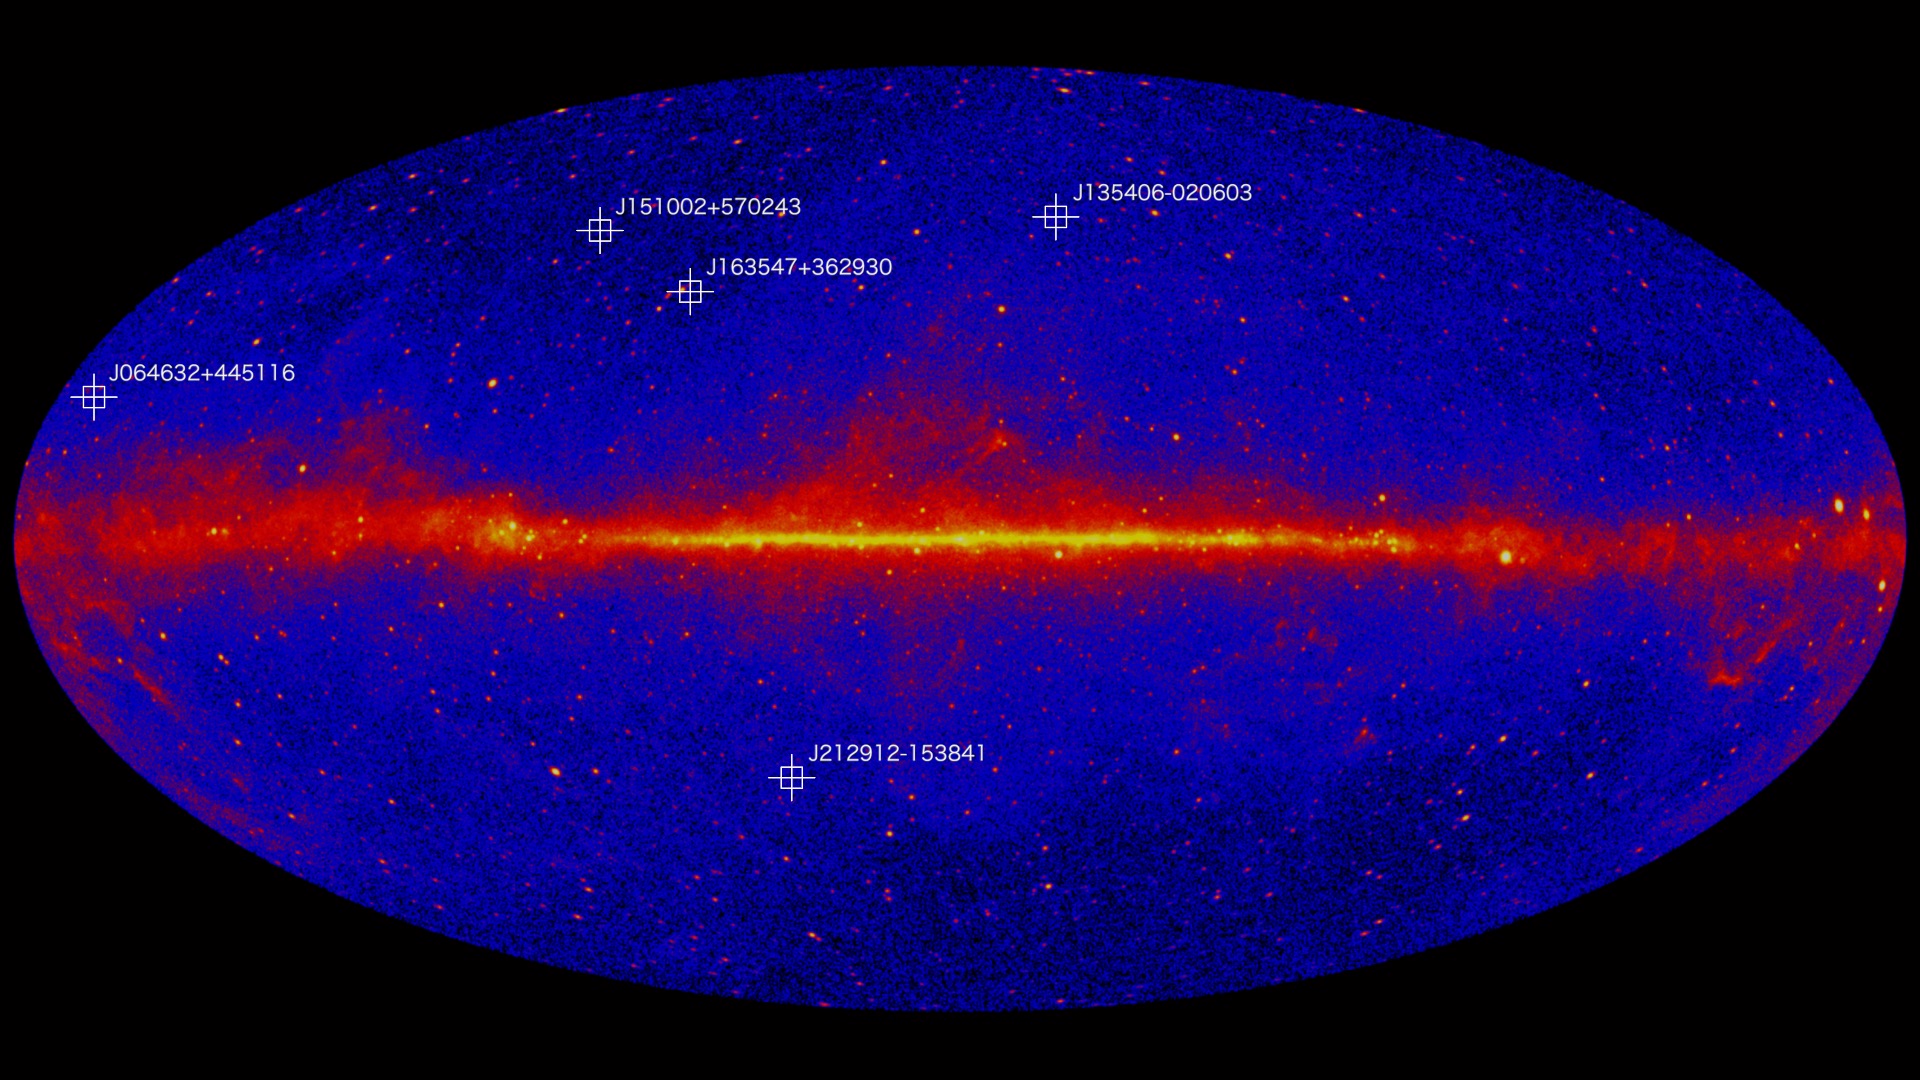 NASA's Fermi Gamma-ray Space Telescope has discovered the five most distant gamma-ray blazars yet known. The light detected by Fermi left these galaxies by the time the universe was two billion years old. Two of these galaxies harbor billion-solar-mass black holes that challenge current ideas about how quickly such monsters could grow.Watch this video on the NASA Goddard YouTube channel.Complete transcript available.